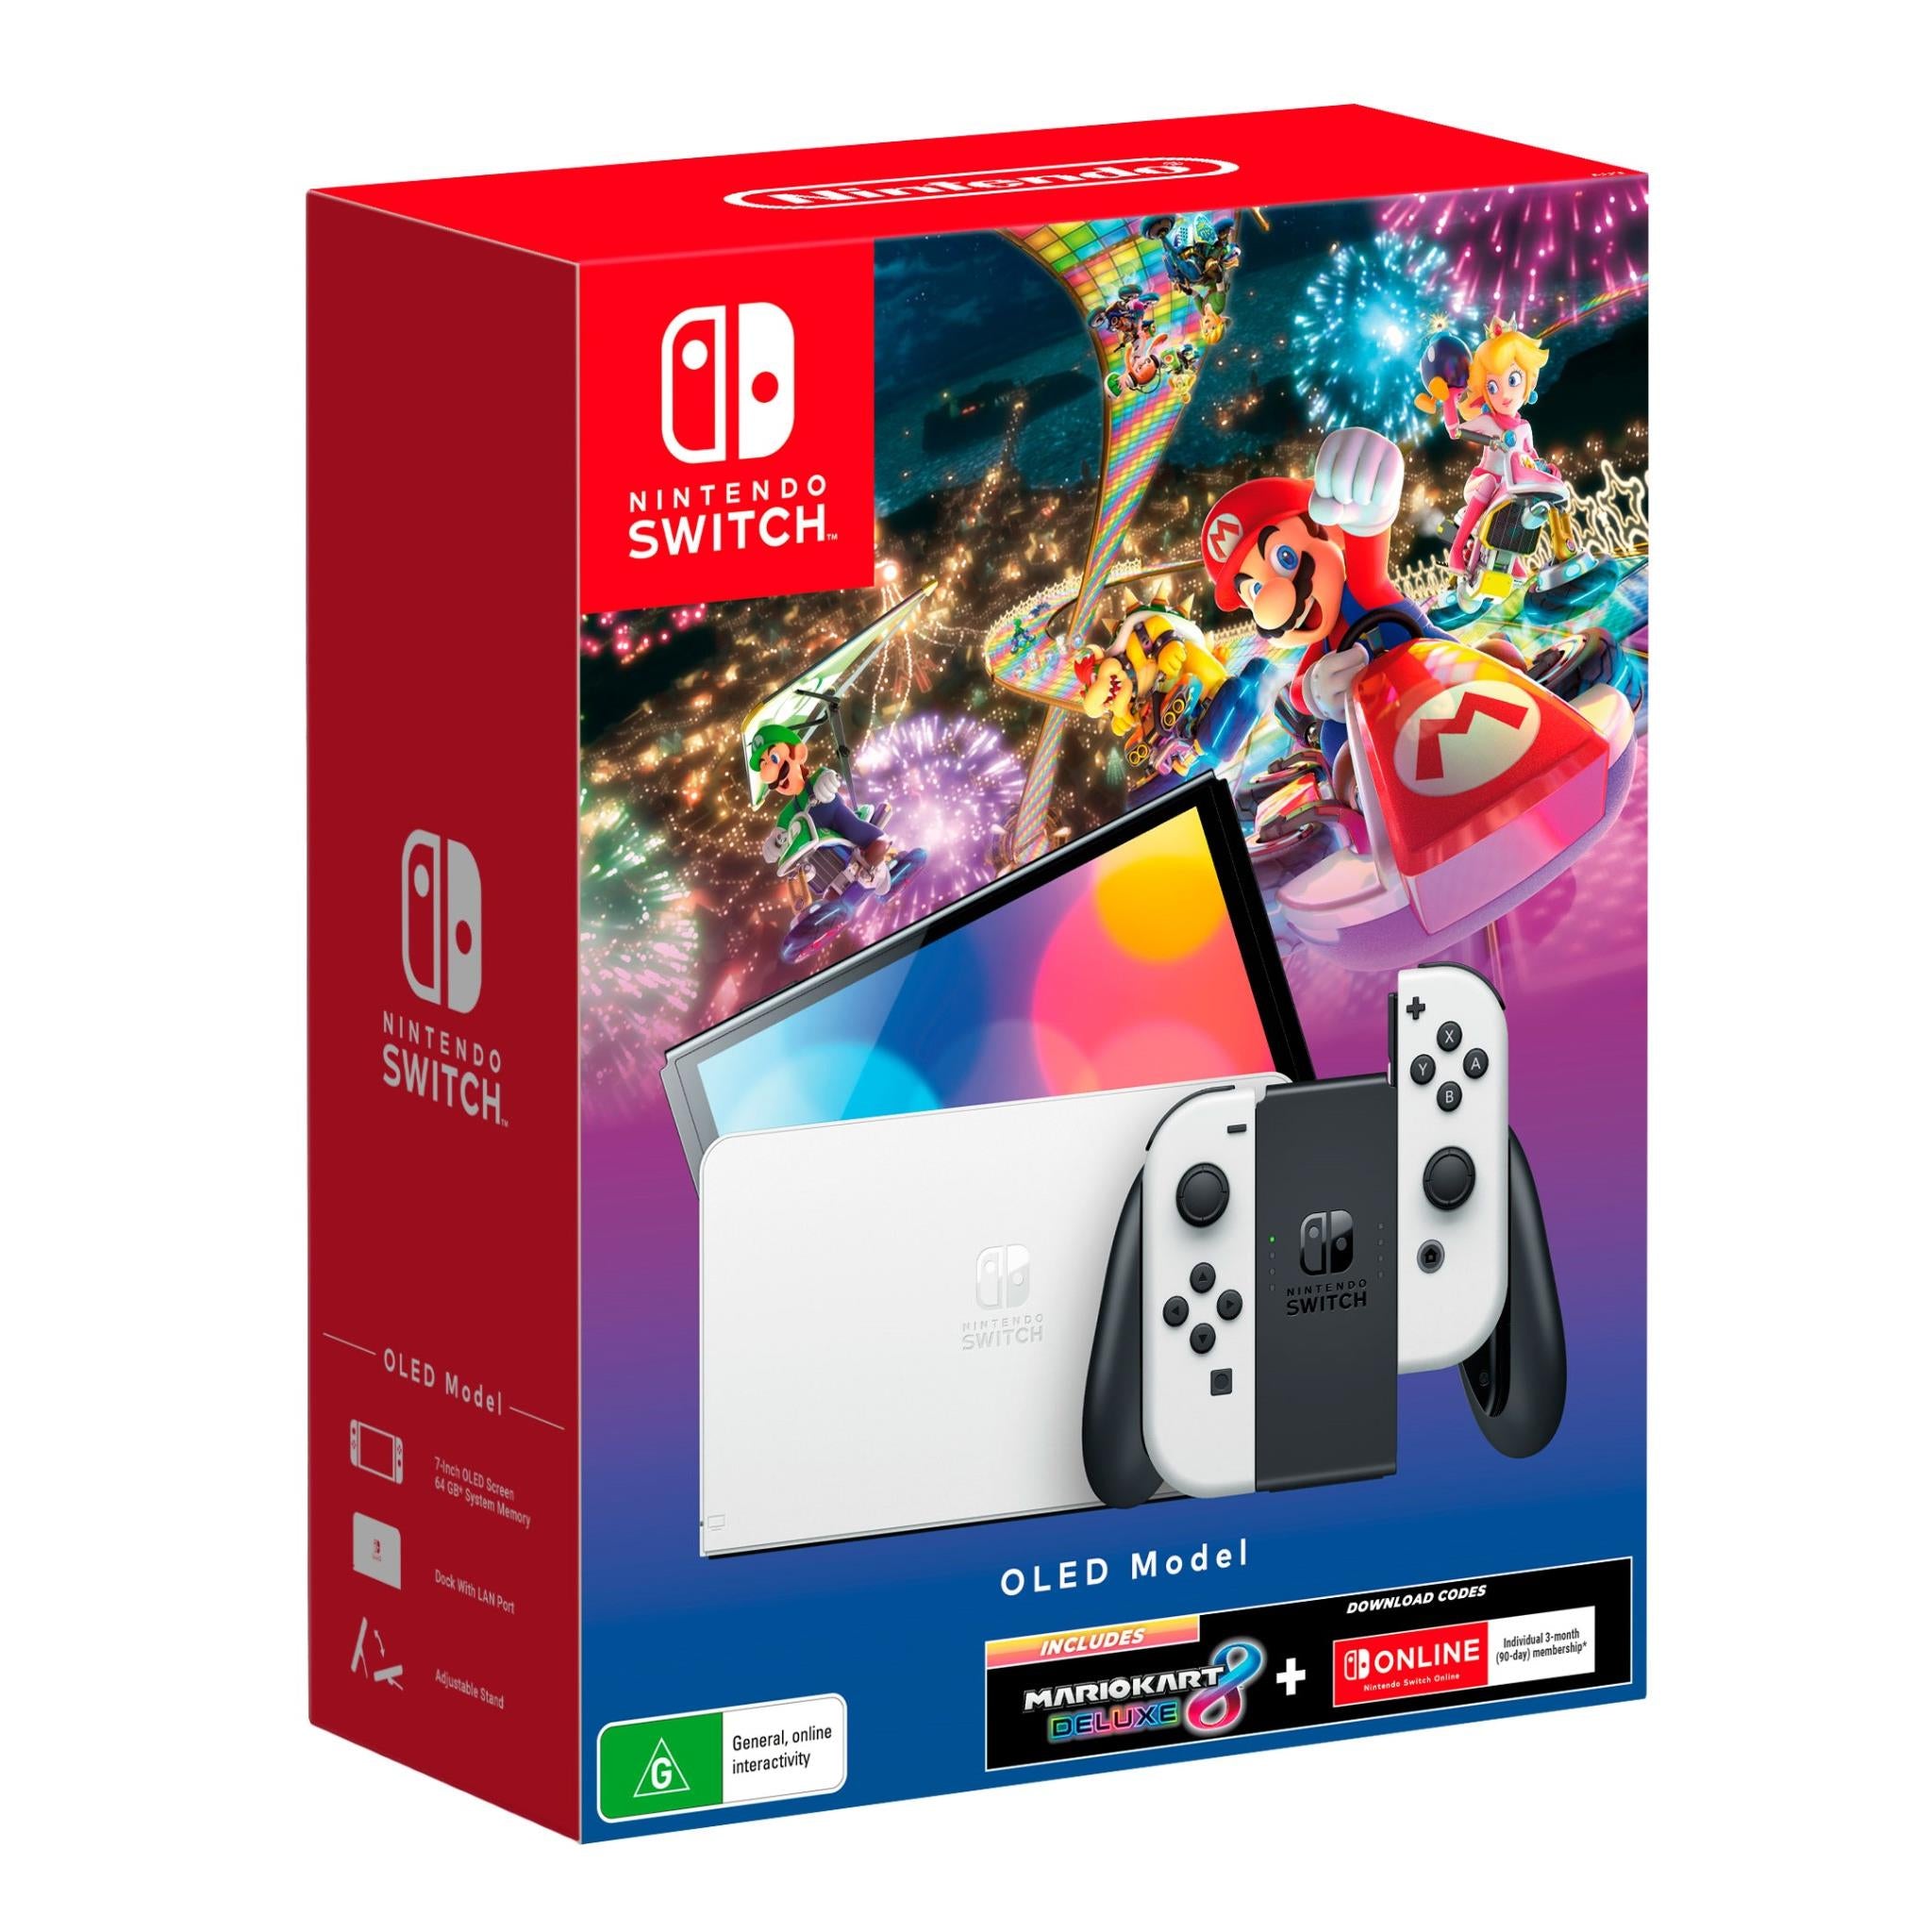 nintendo switch oled model white with mario kart 8 deluxe & switch online 3 months membership bundle